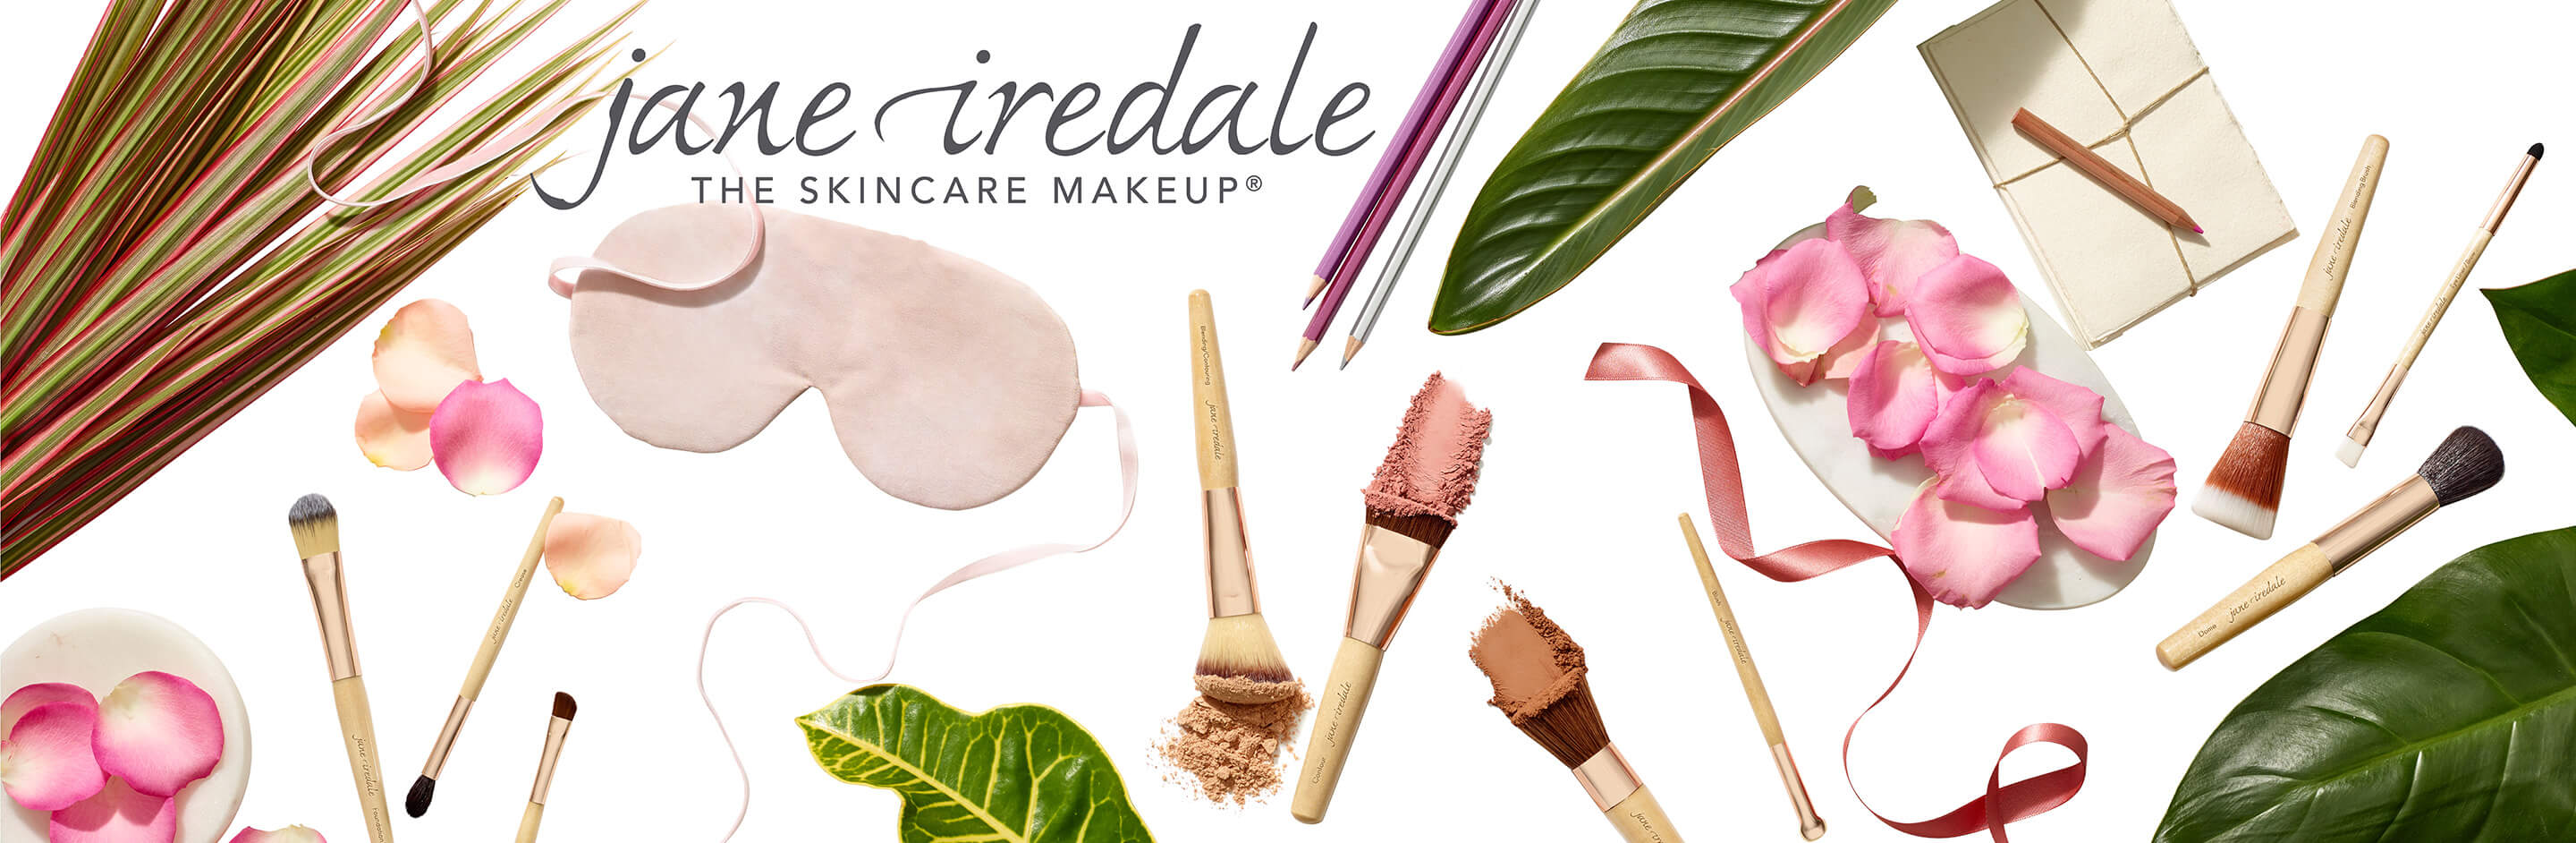 About Jane Iredale